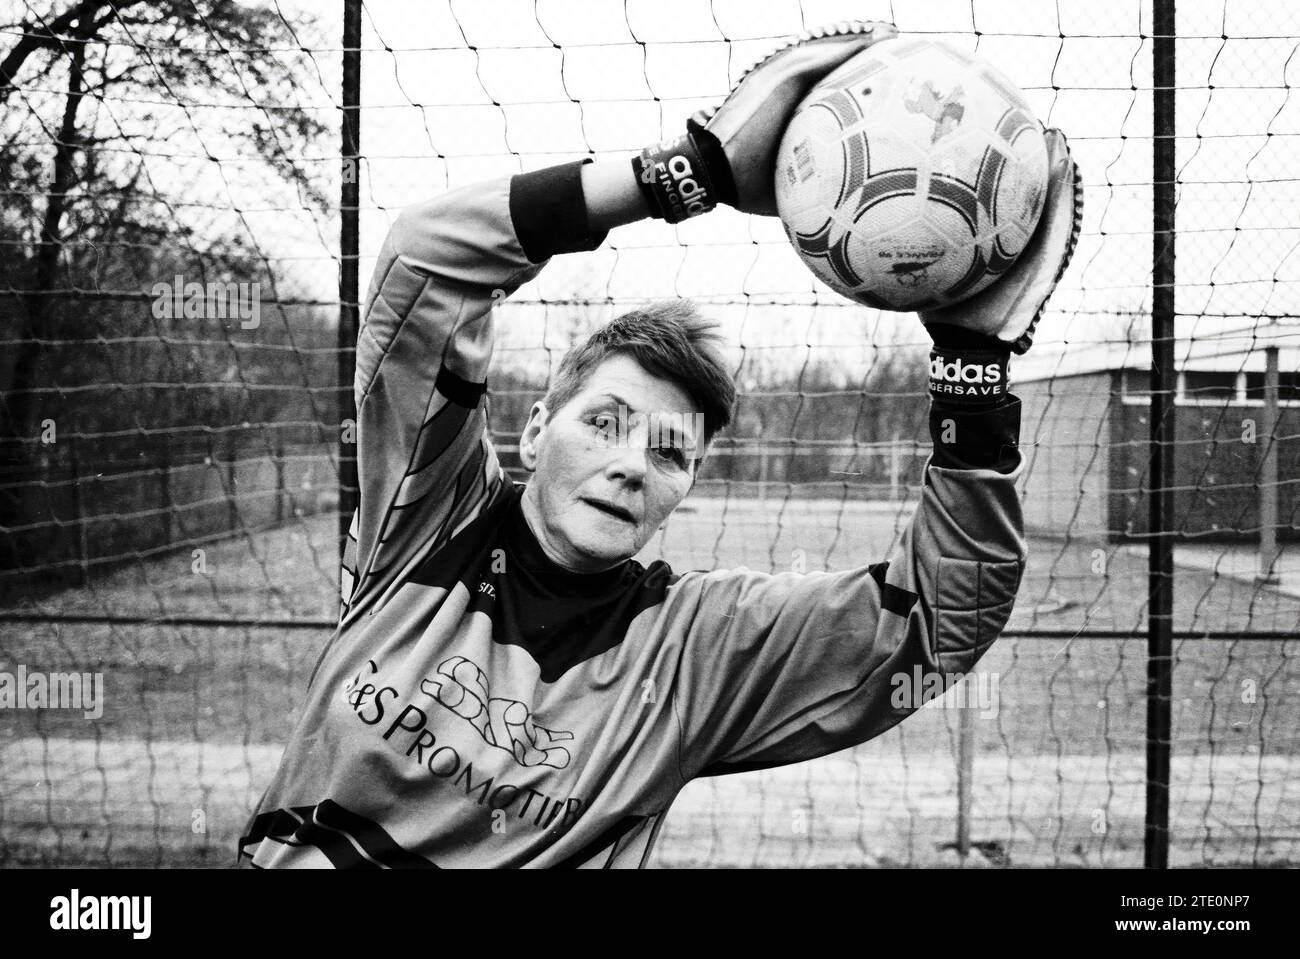 62 year old goalkeeper TYBB Haarlem, Haarlem, The Netherlands, 25-11-1997, Whizgle News from the Past, Tailored for the Future. Explore historical narratives, Dutch The Netherlands agency image with a modern perspective, bridging the gap between yesterday's events and tomorrow's insights. A timeless journey shaping the stories that shape our future. Stock Photo